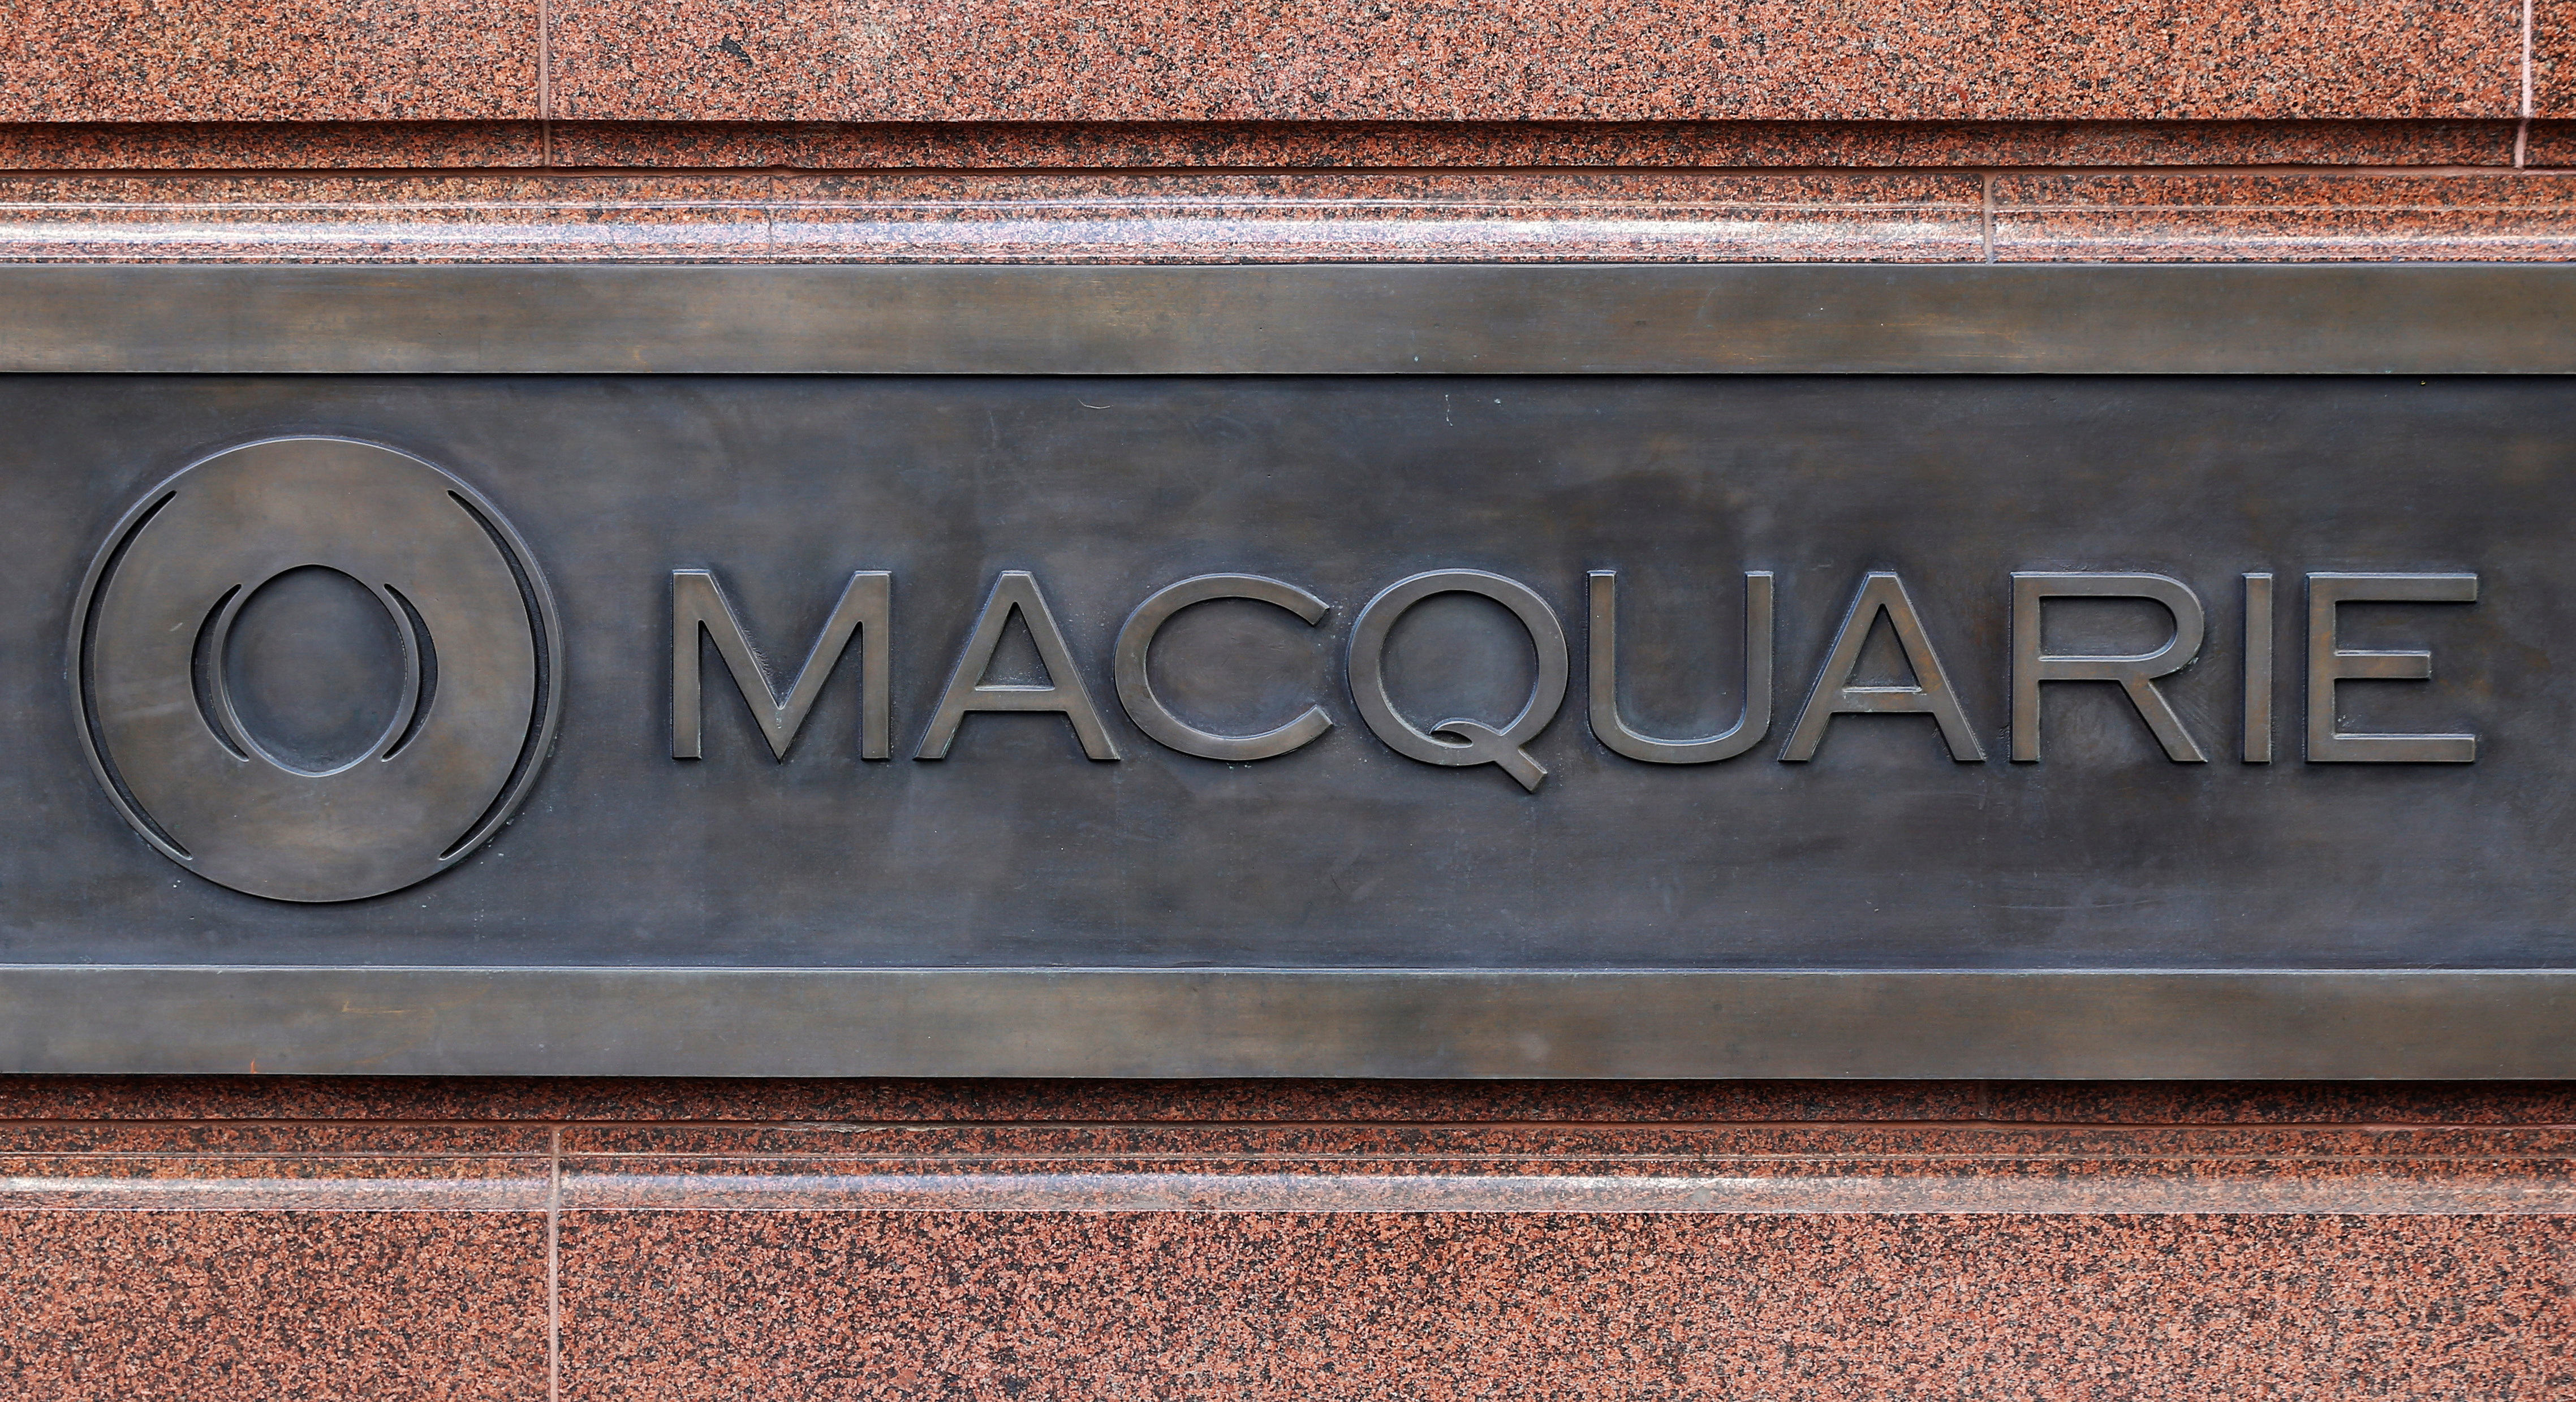 Macquarie Group's logo is pictured on the wall of the Sydney headquarters after the Australian bank's full year results were announced